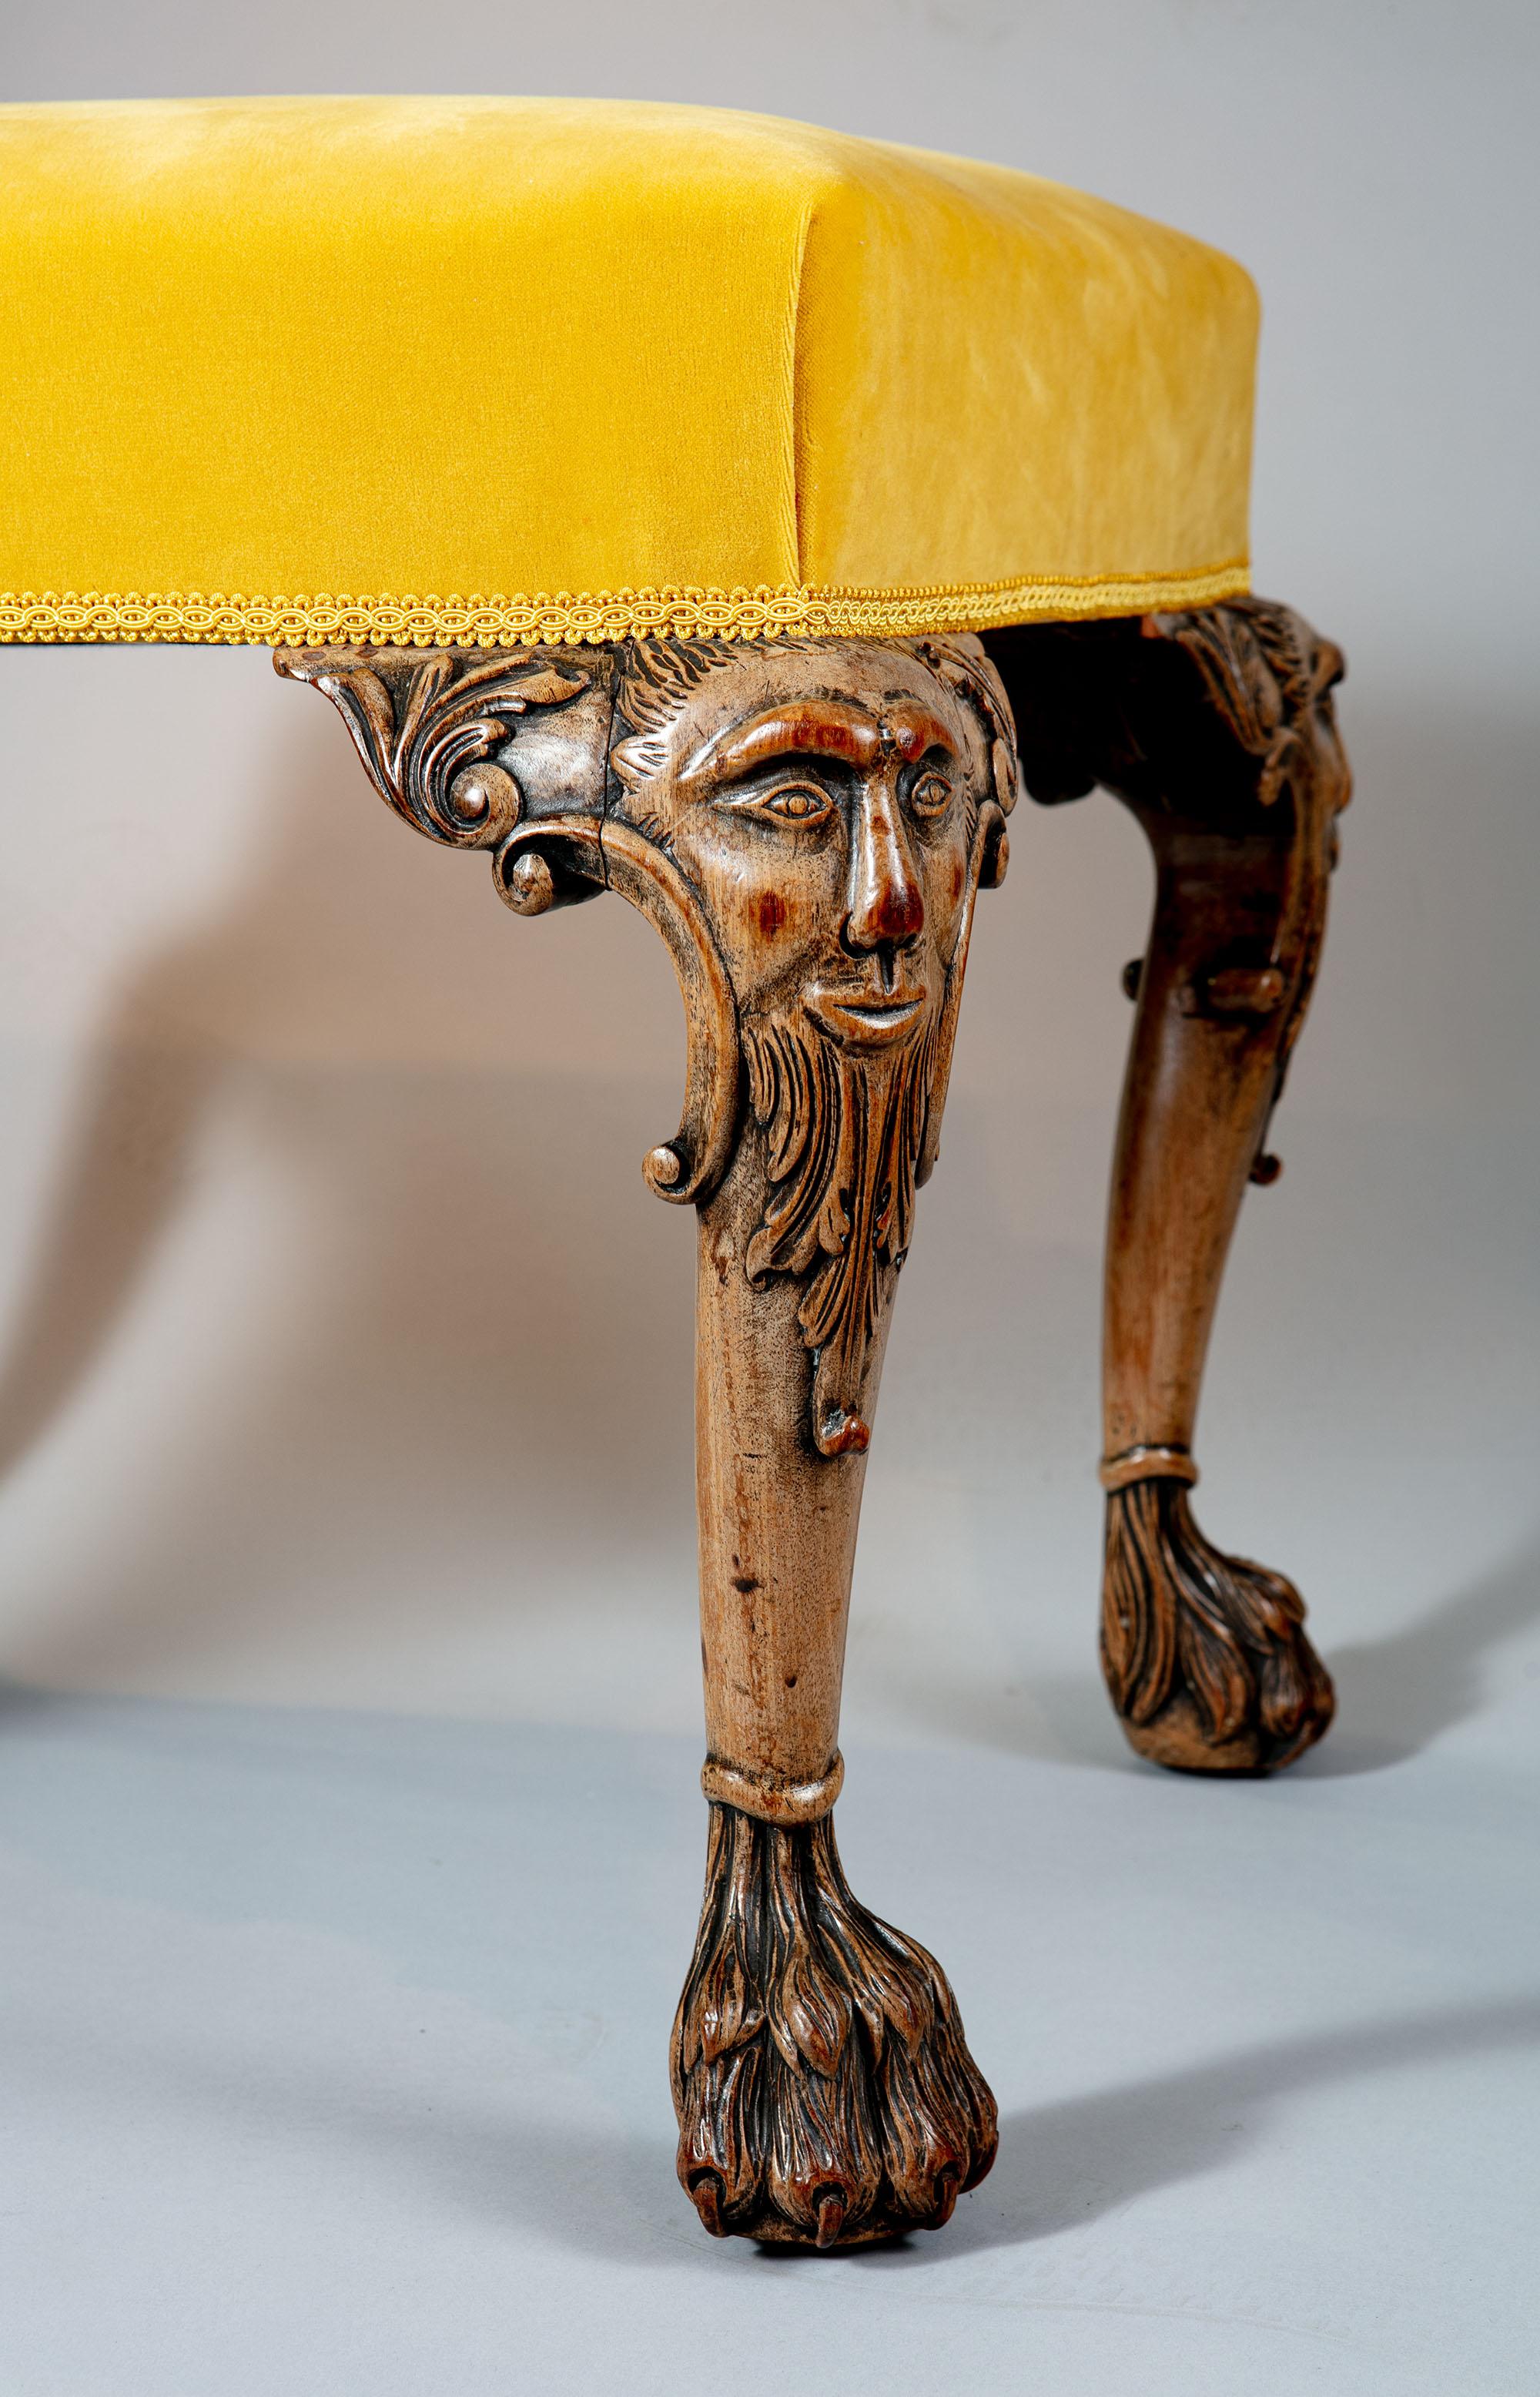 Nicholas Wells antiques is pleased to offer this fine 19th century mahogany carved stool, re-upholstered in yellow velvet, the cabriole legs carved with effigies of the mystical Green Man, with C scrolls and acanthus details, raised on boldly carved